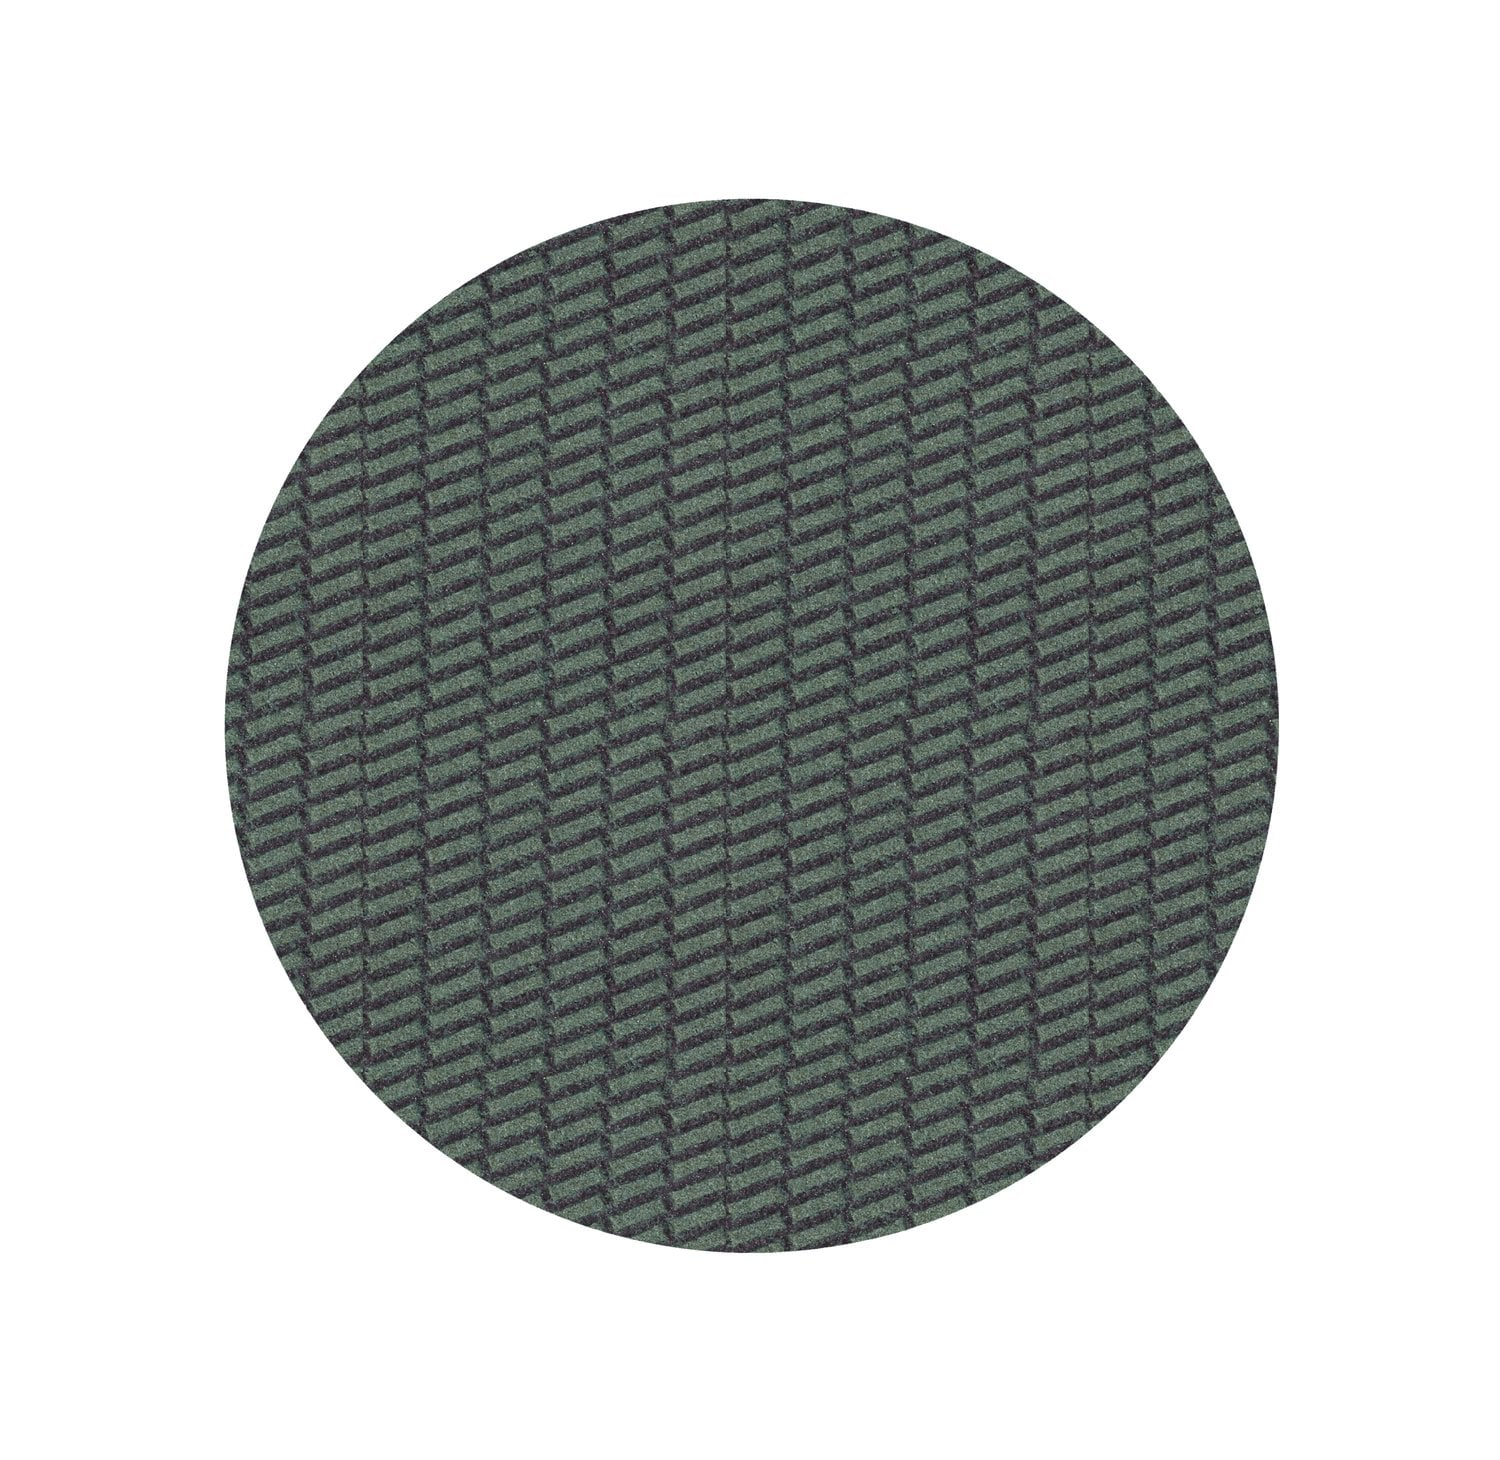 7100013228 - 3M Trizact Hookit Cloth Disc 337DC, A65 X-weight, Config